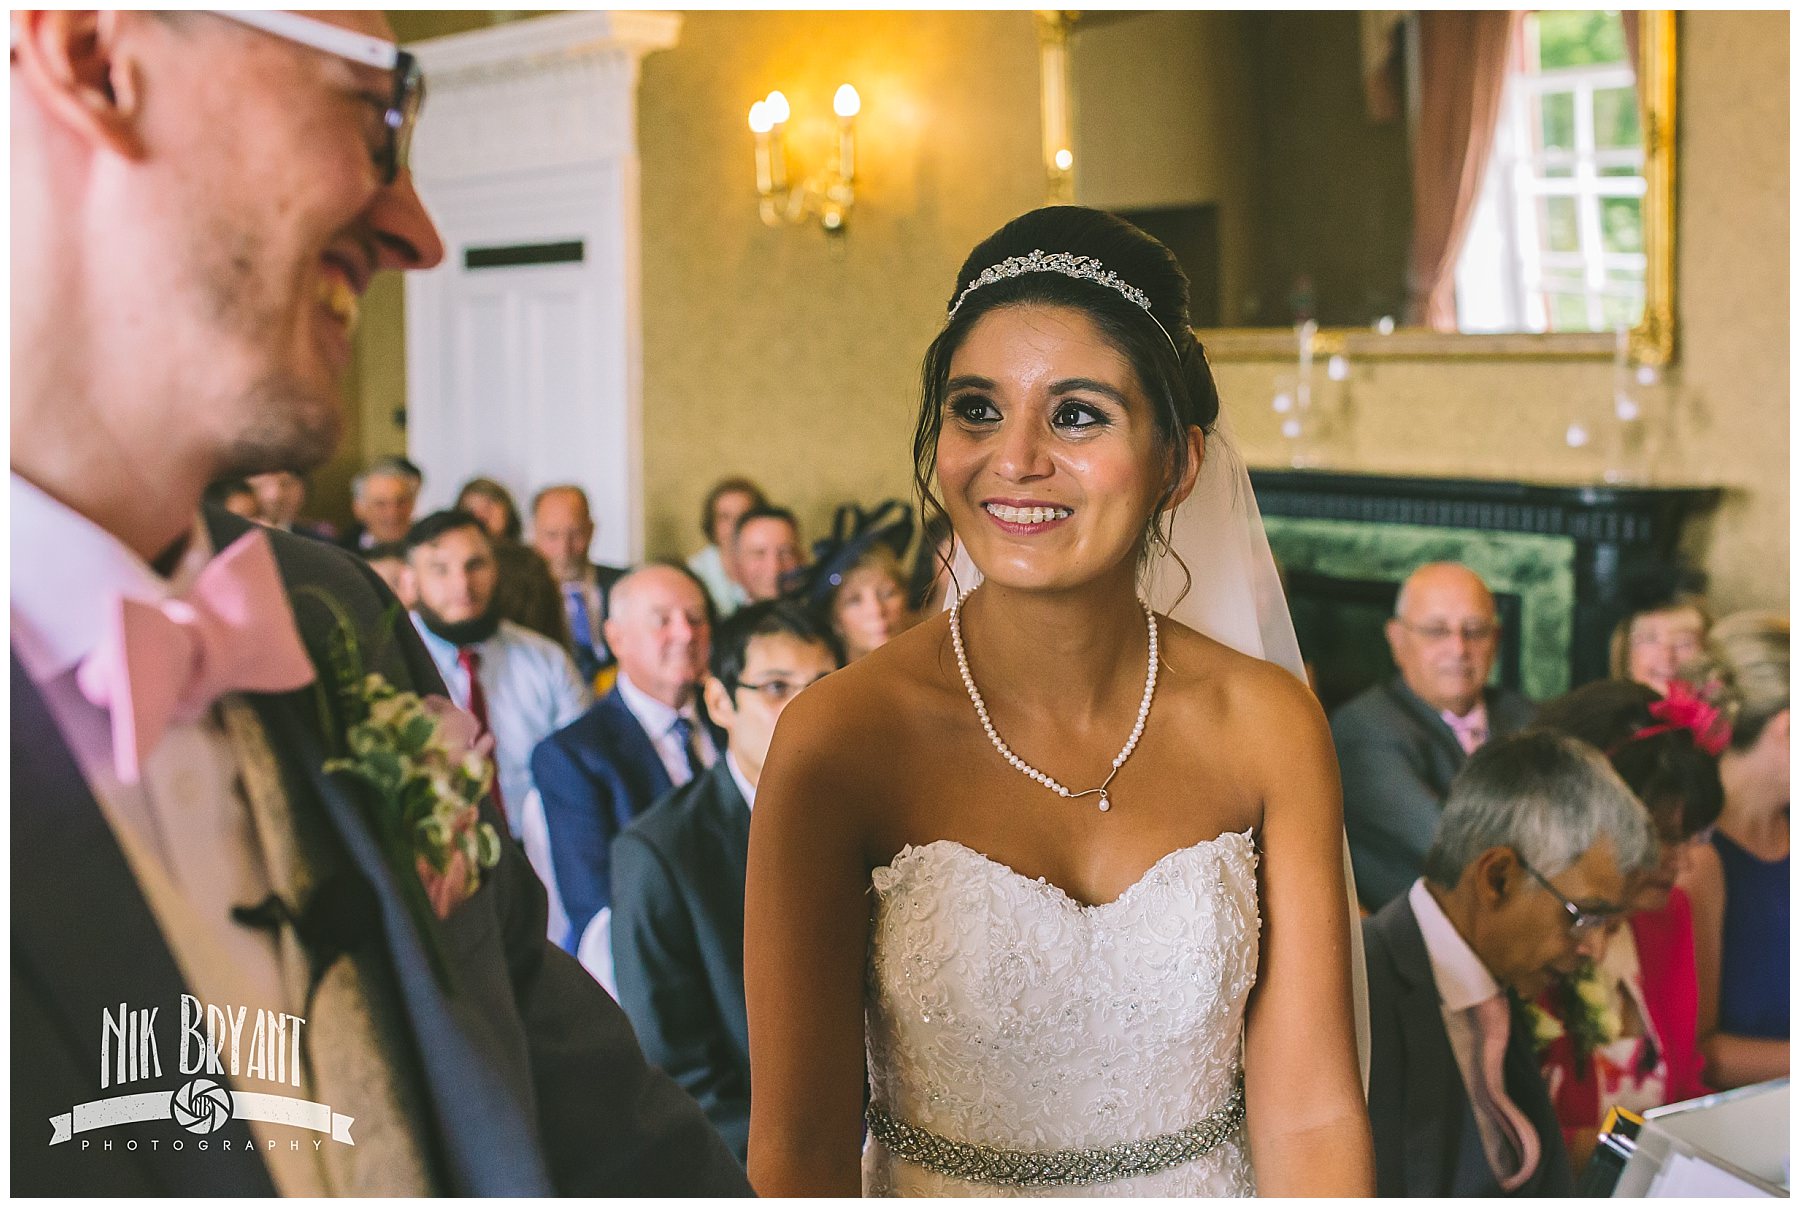 Bride smiles as she sees her groom for the first time